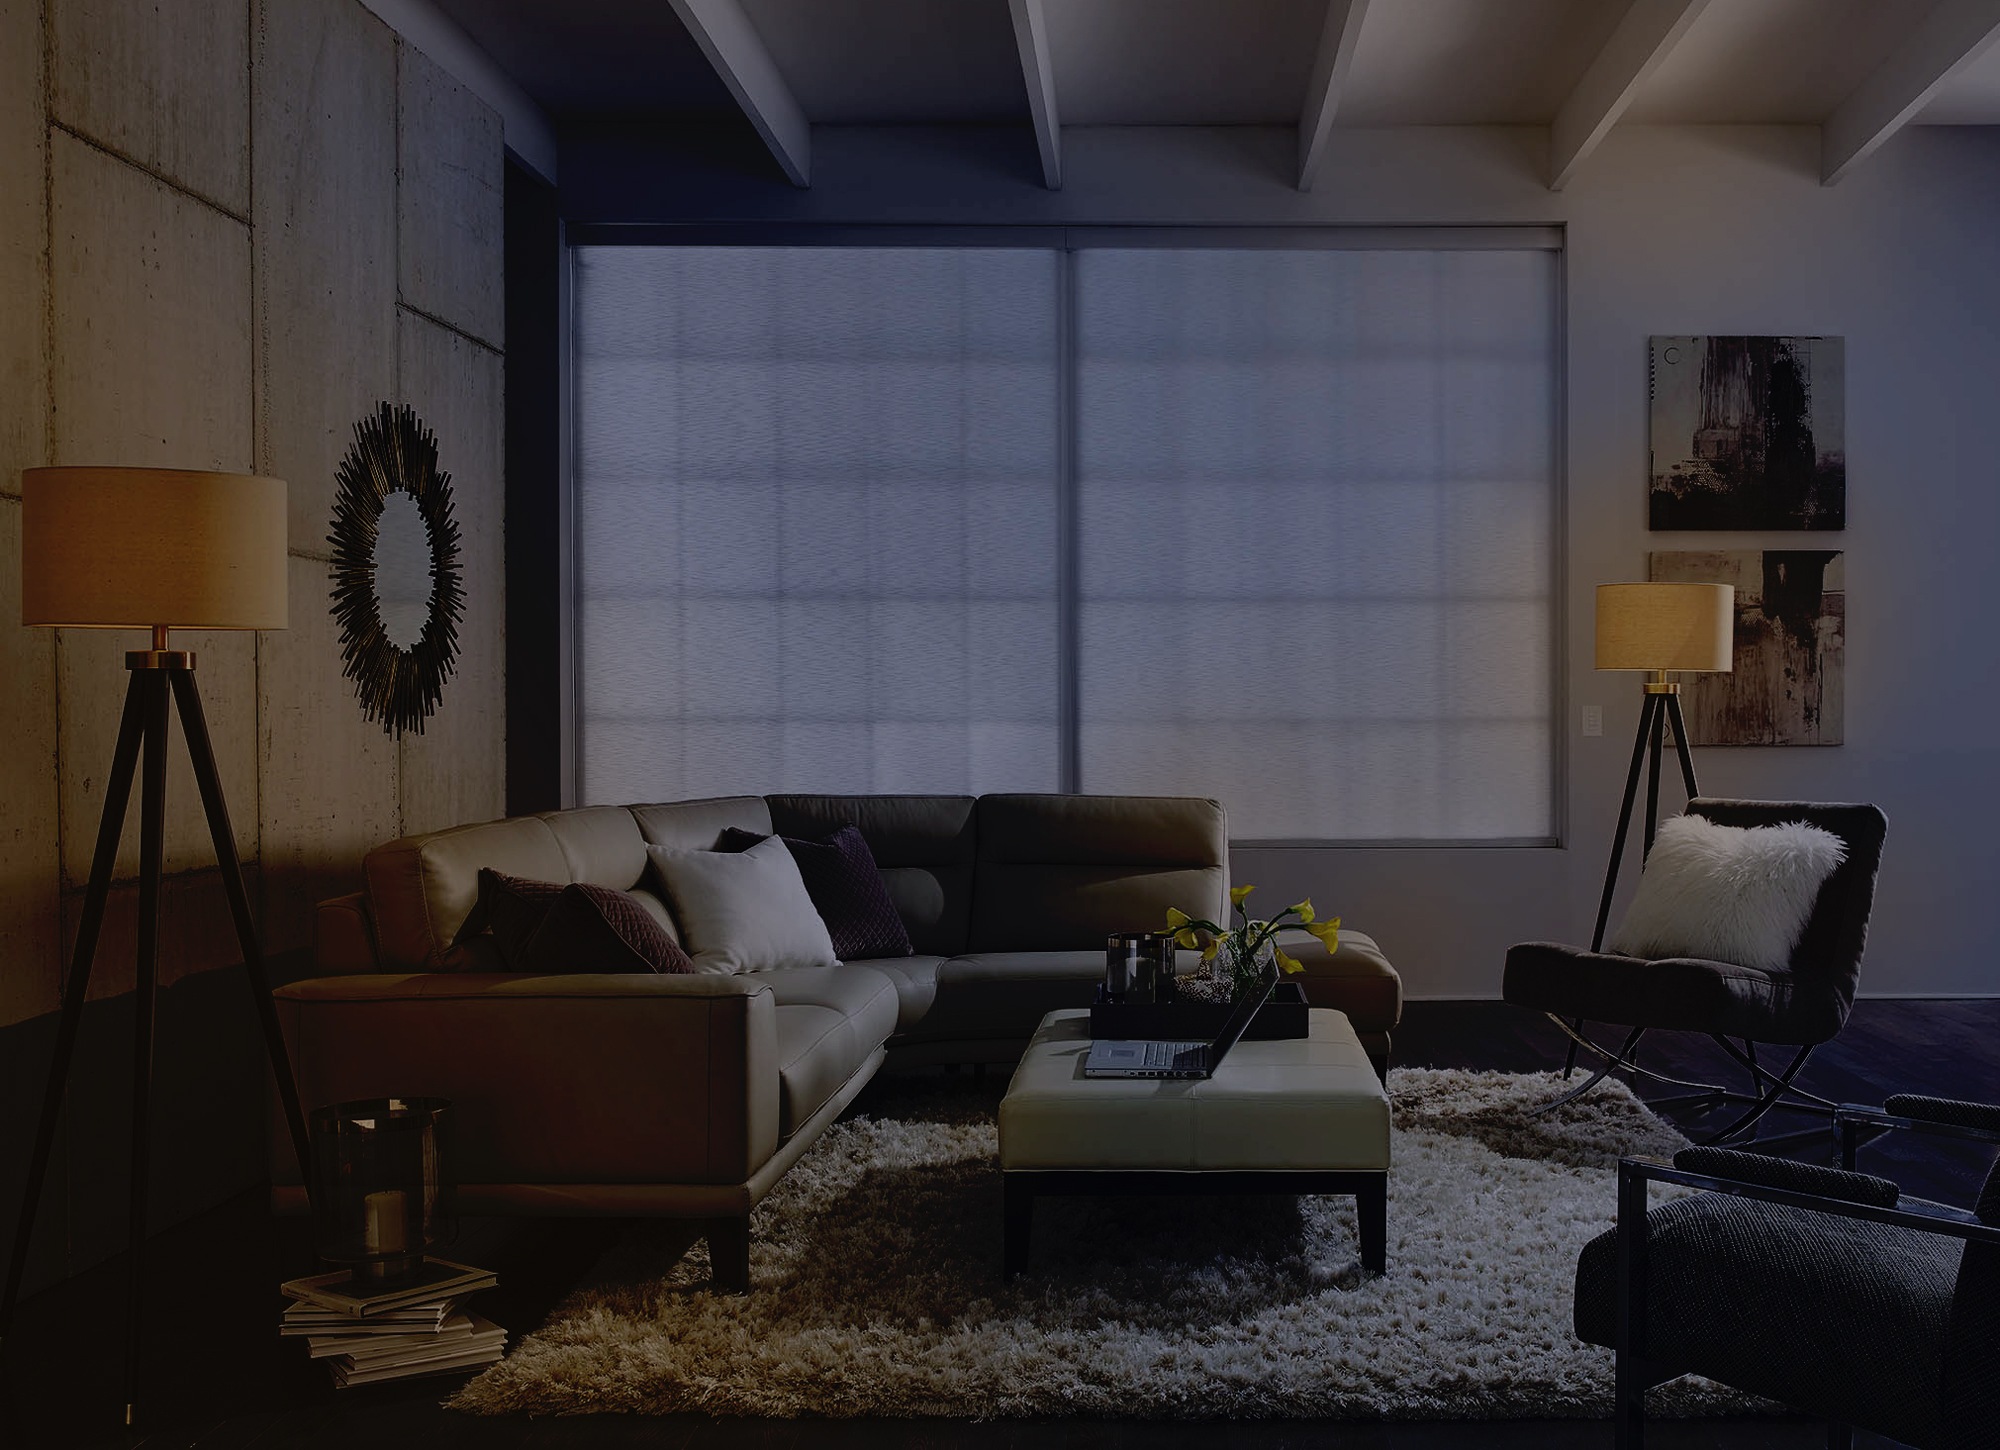 Image of a living room with bed time lighting